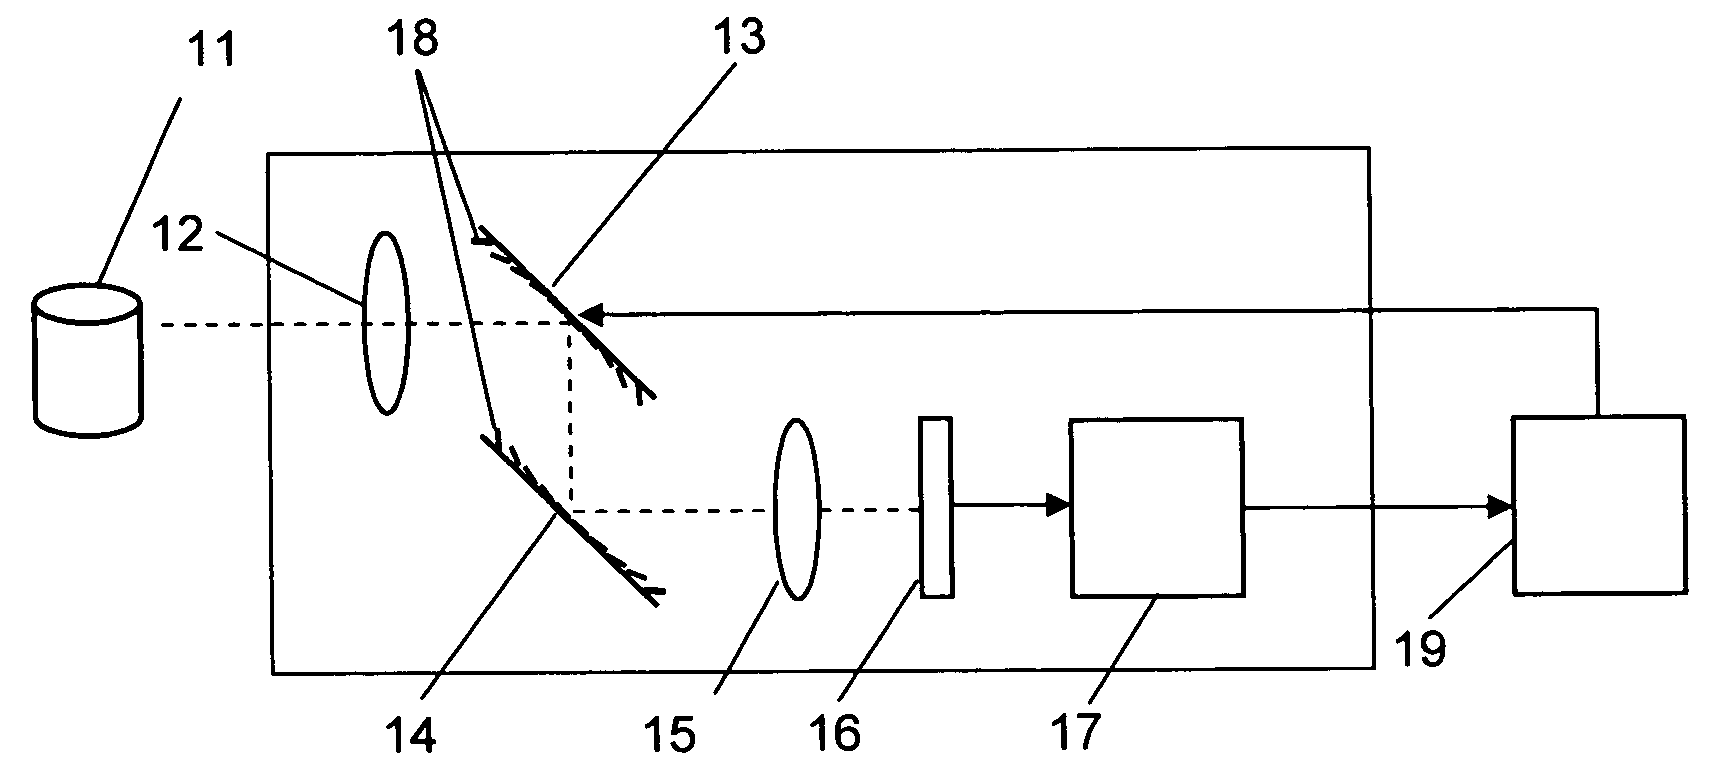 Three-dimensional imaging system for pattern recognition